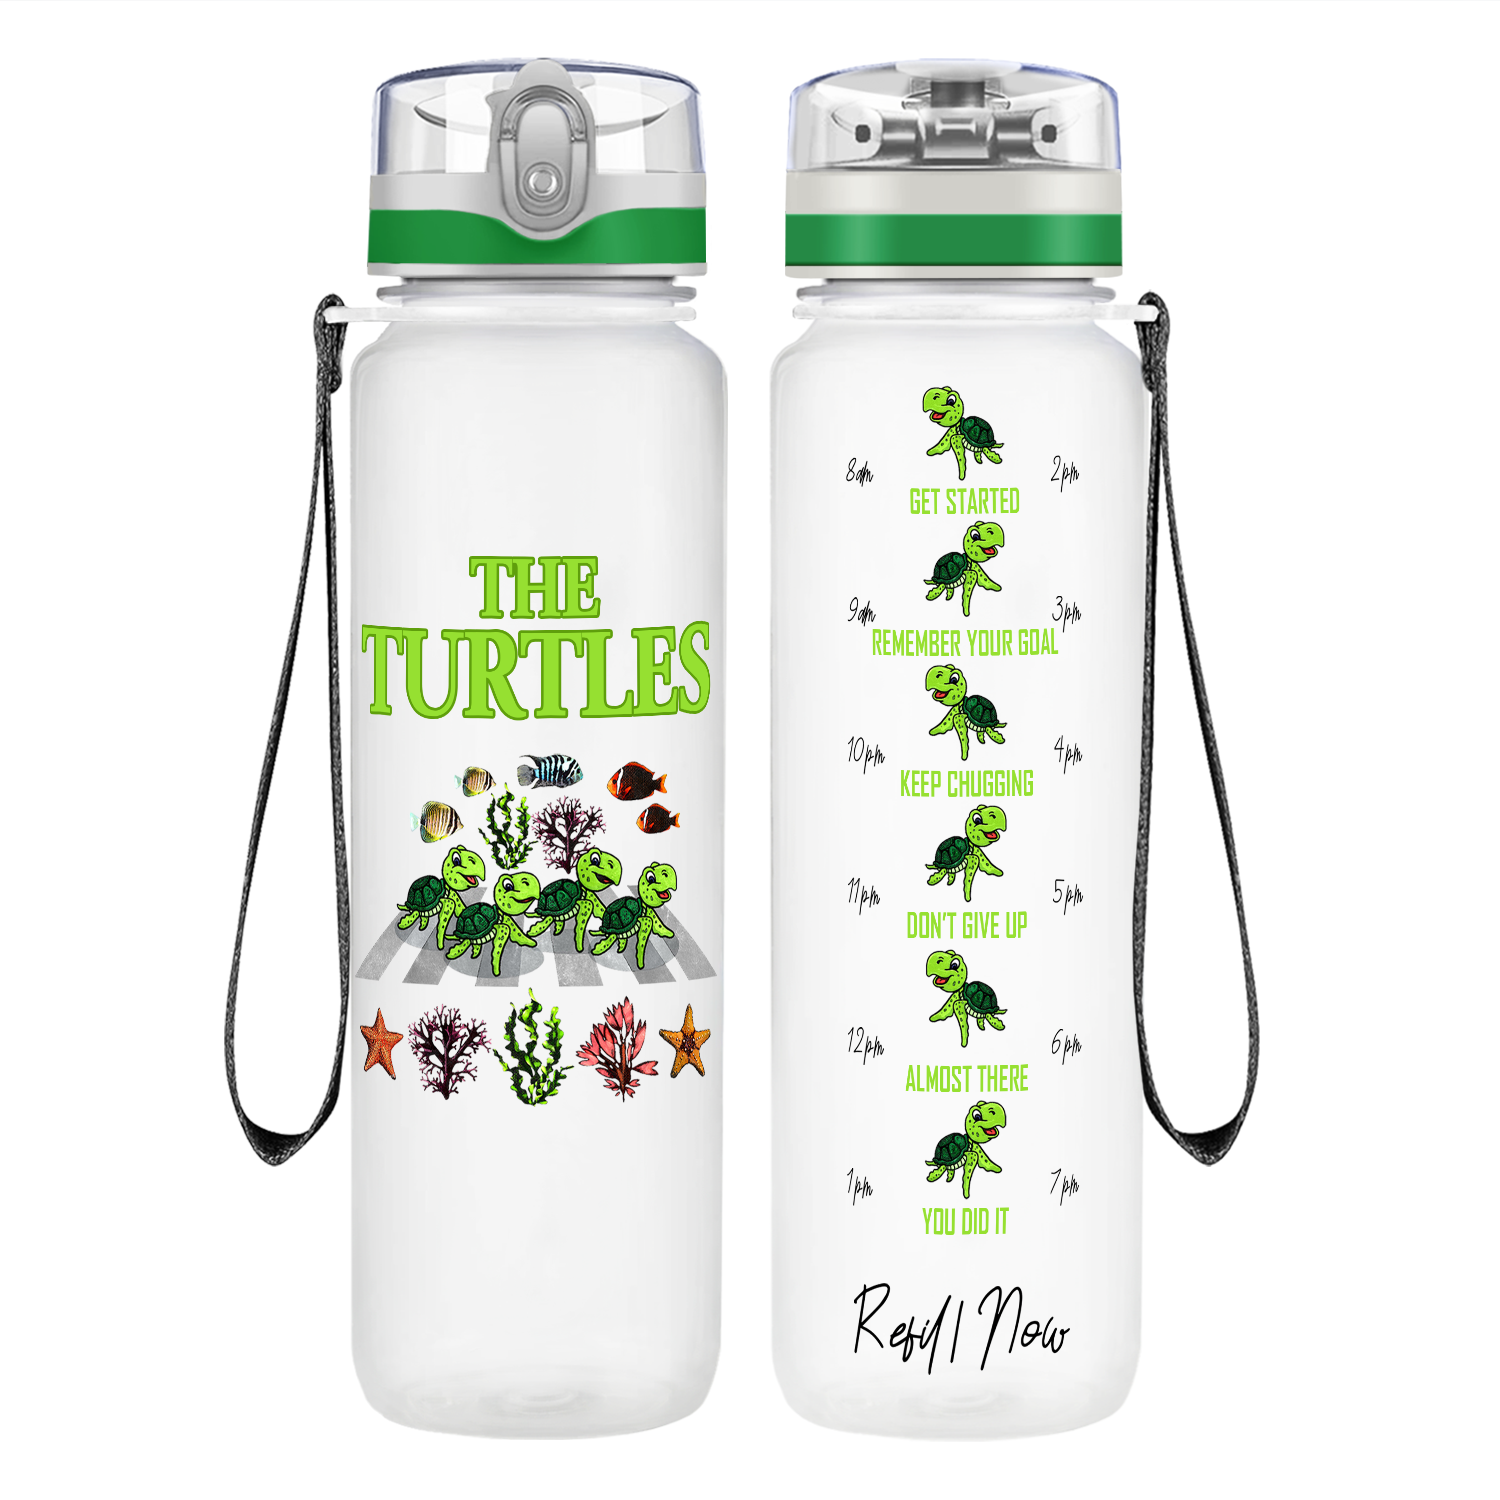 The Turtles on 32 oz Motivational Tracking Water Bottle